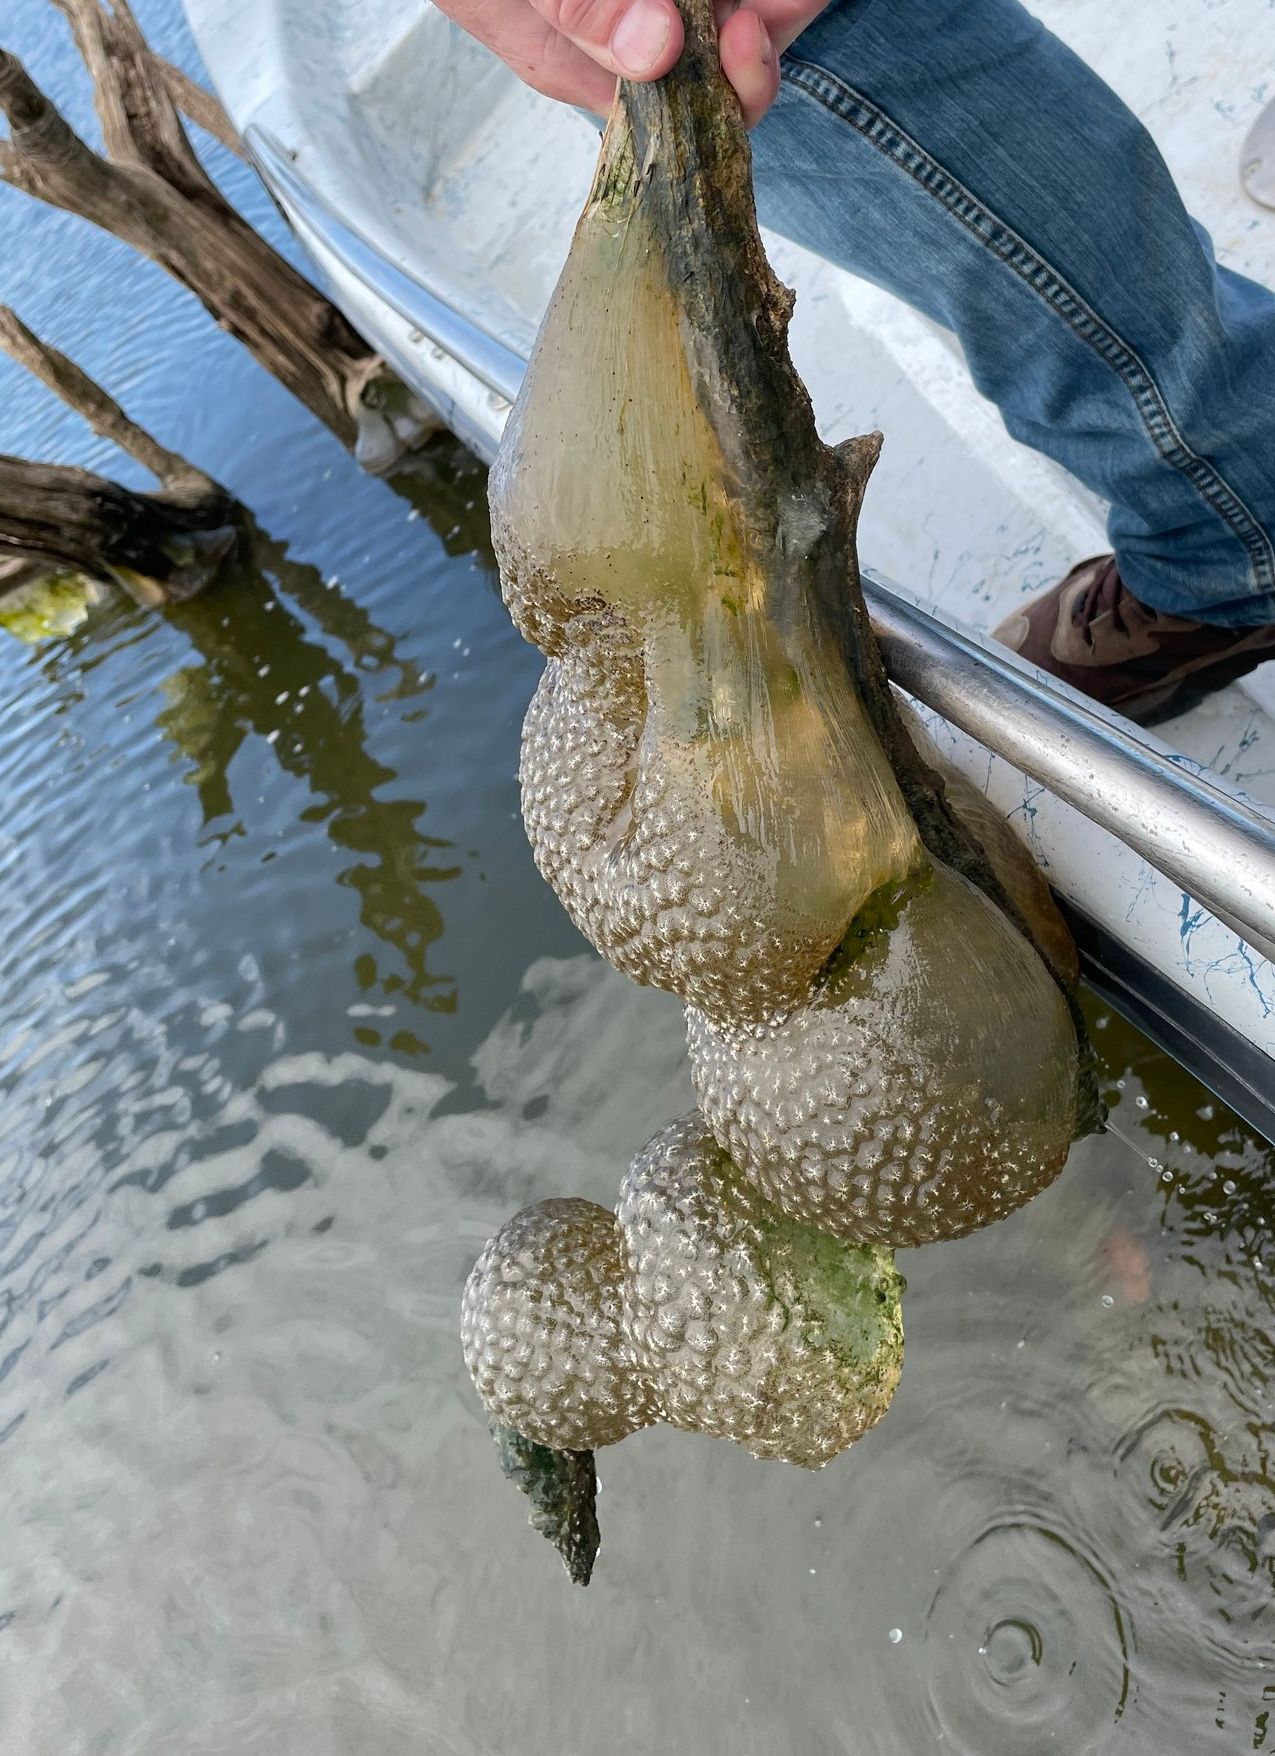 Wildlife officials have warned locals about the presence of 'alien egg pods' spotted in an Oklahoma lake. Image Credits: Oklahoma Department of Wildlife Conservation (ODWC)